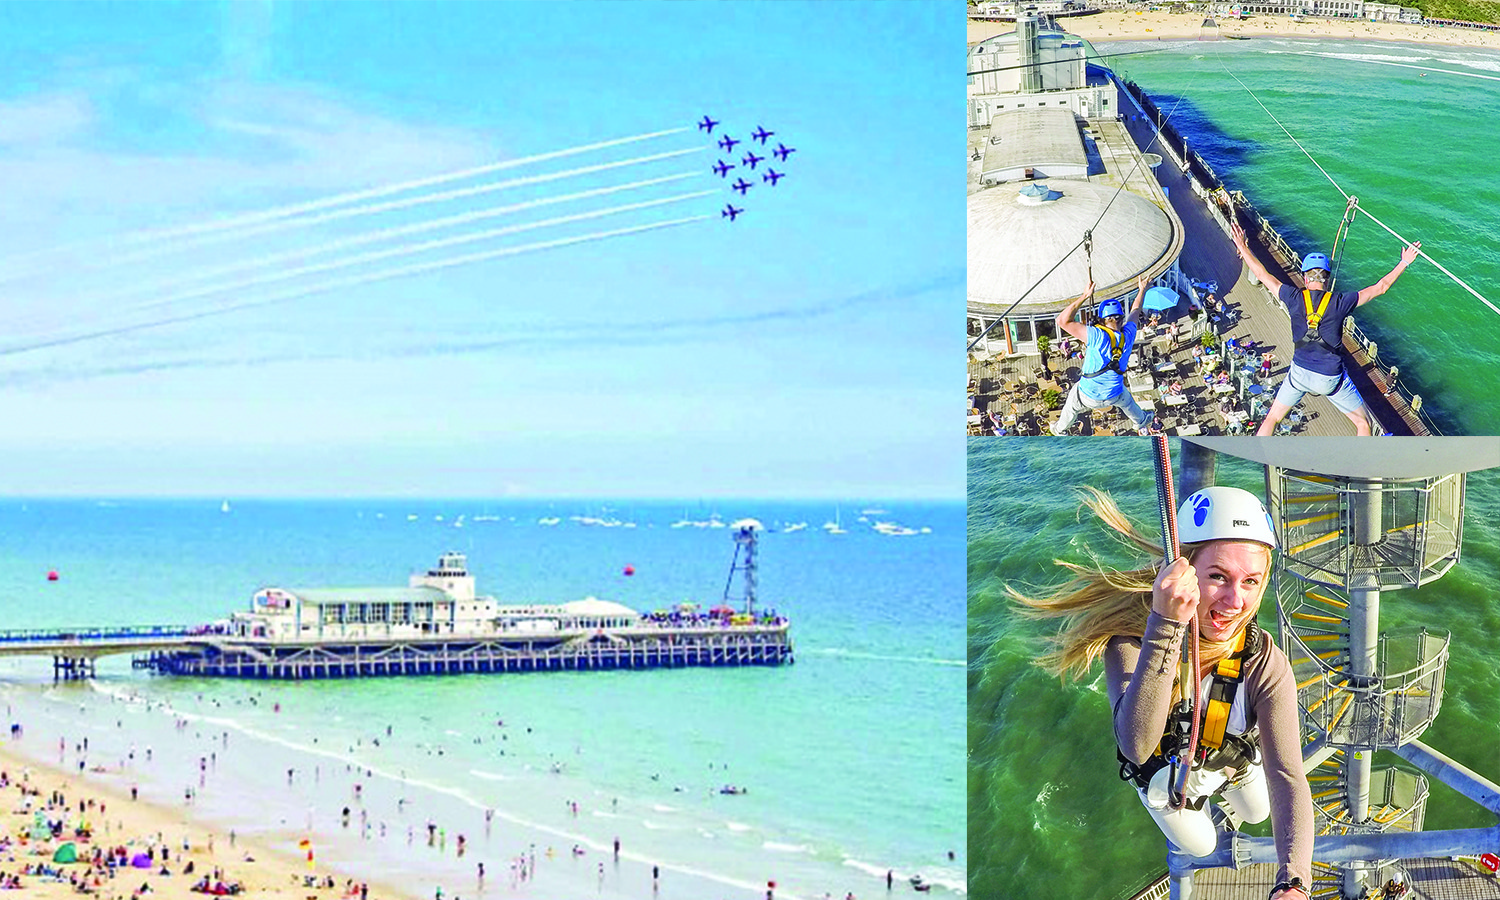 Fly below the Red Arrows at the Bournemouth Air Festival!